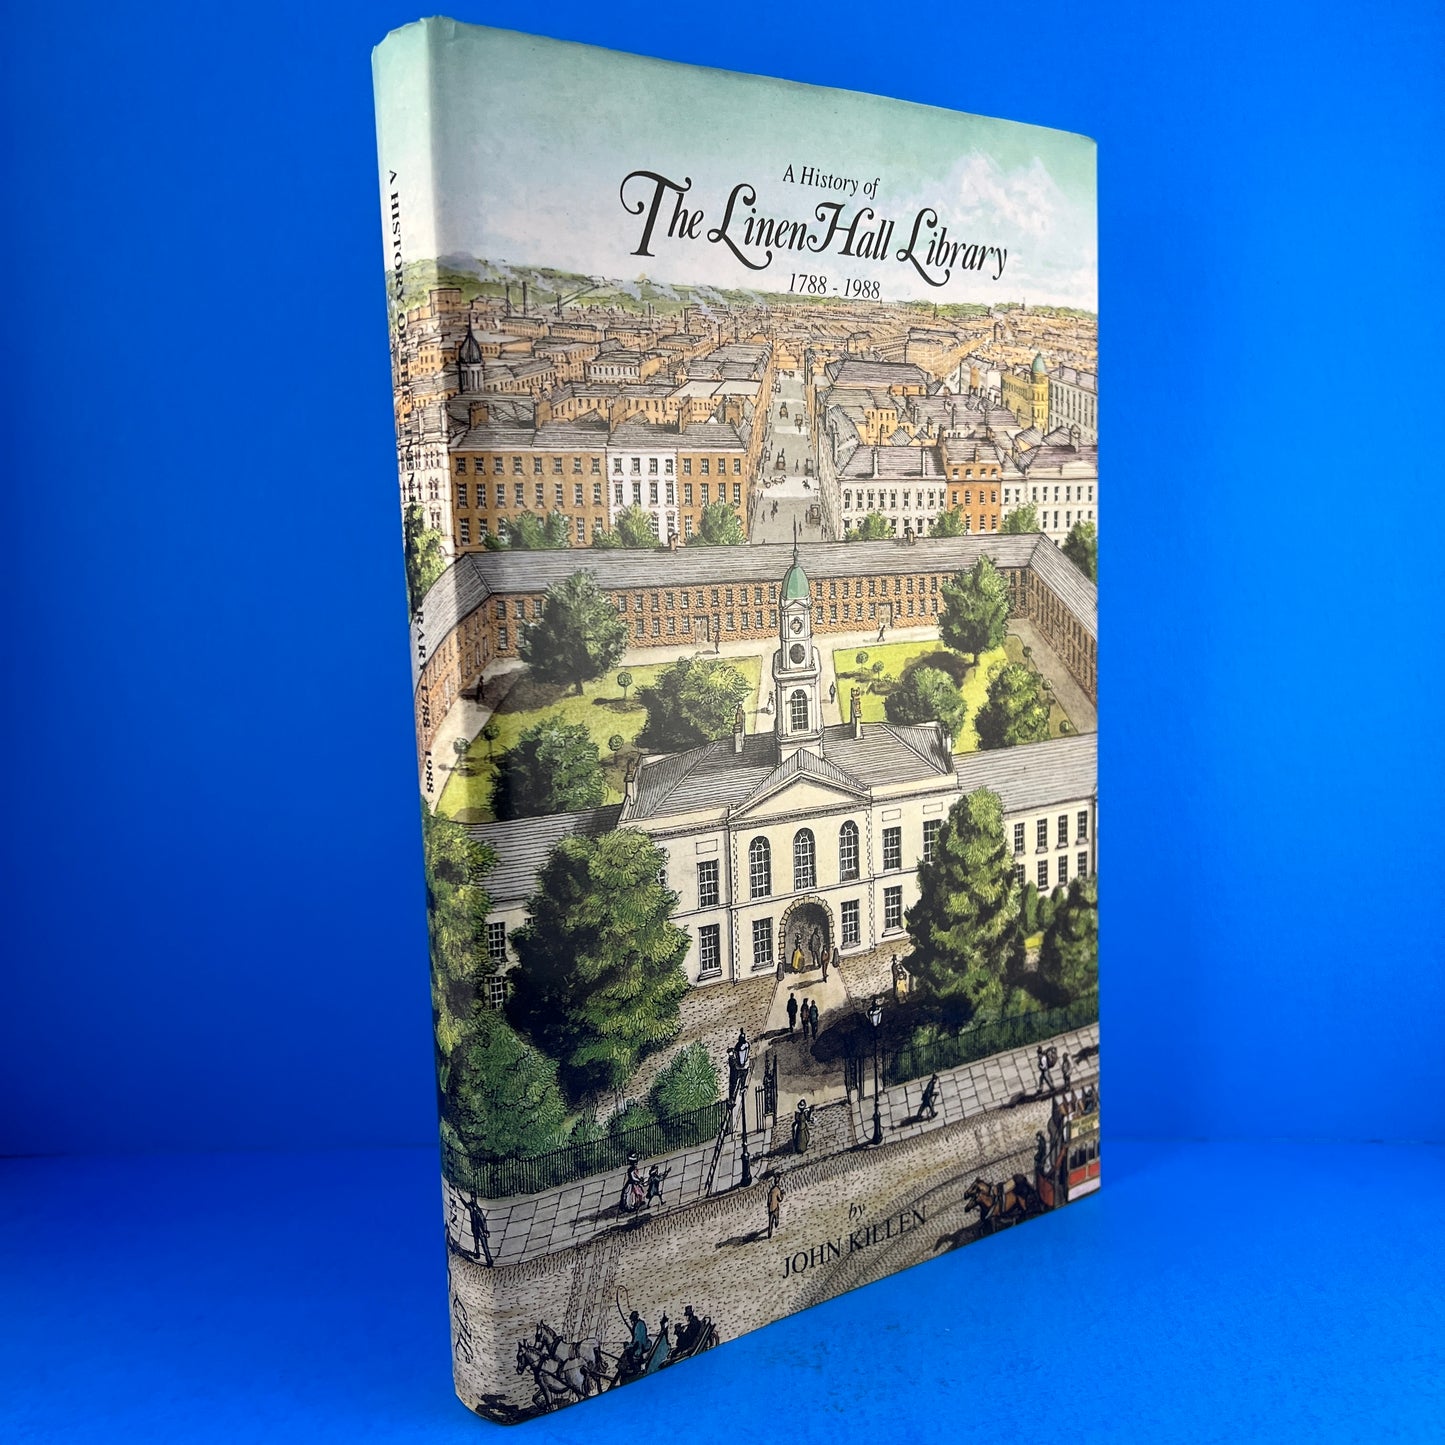 A History of the Linen Hall Library: 1788-1988